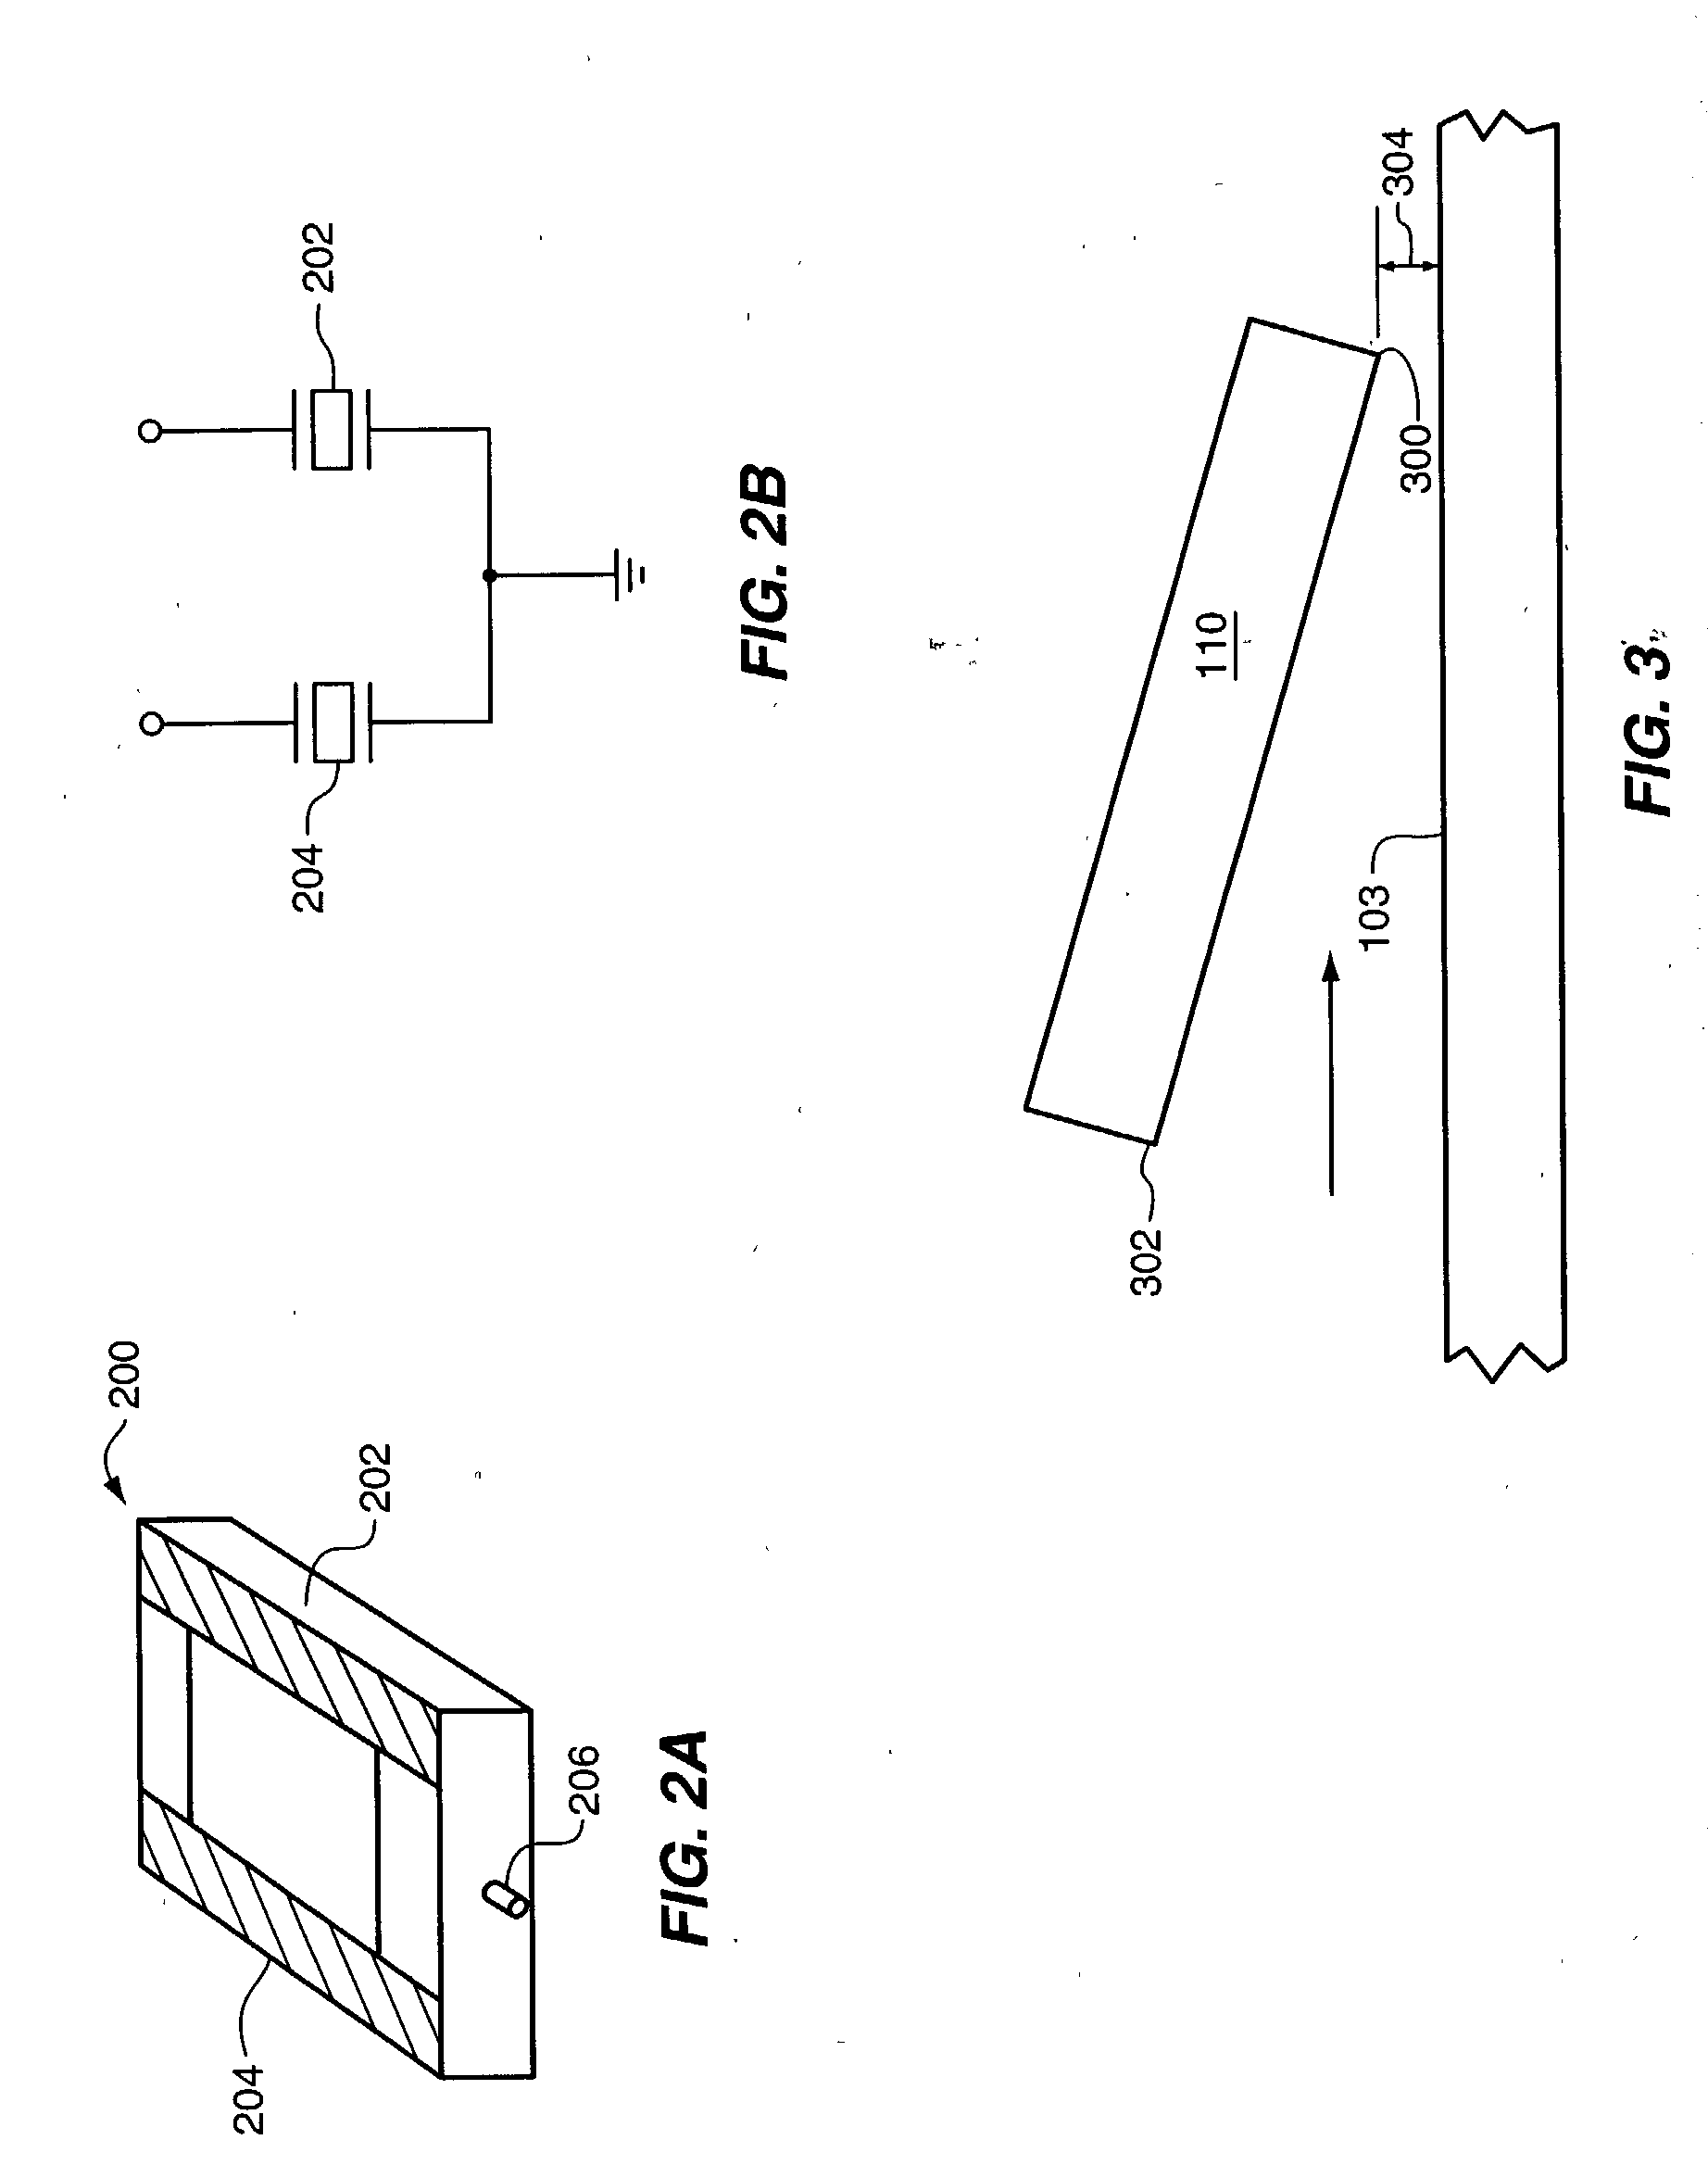 Peizoelectric microactuator and sensor failure detection in disk drives